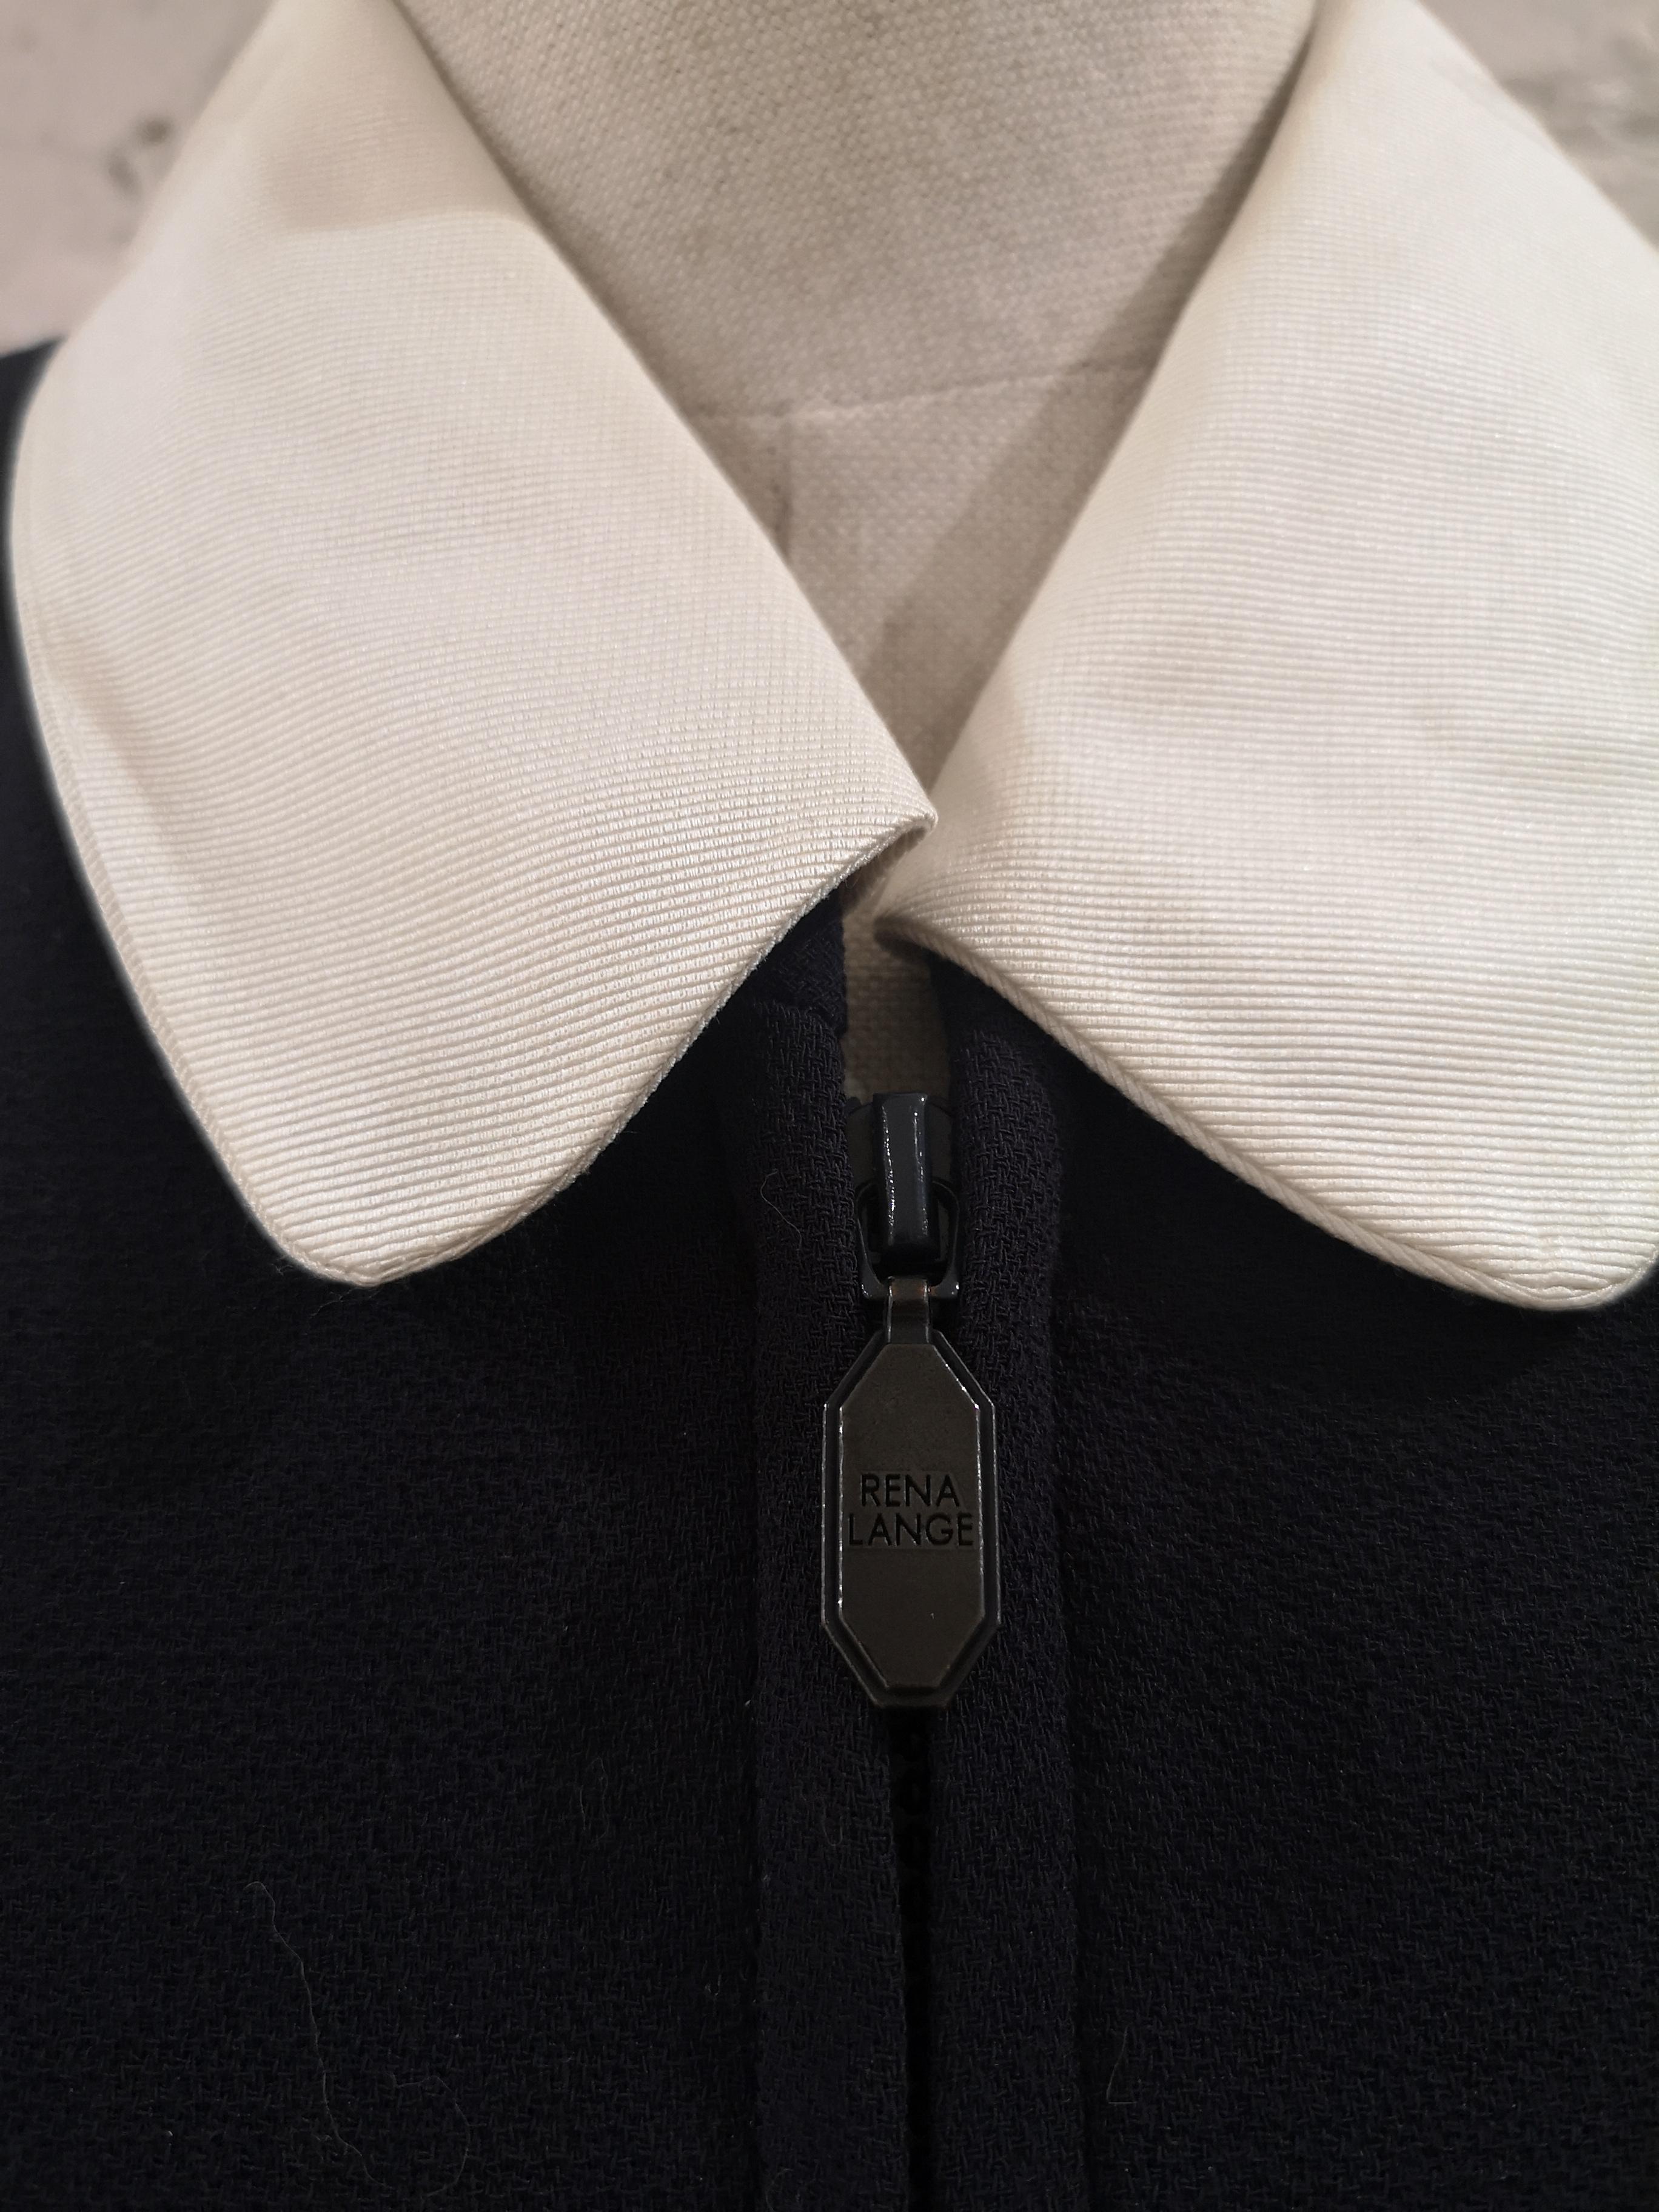 Rena Lange blue white collar wool jacket In Excellent Condition For Sale In Capri, IT